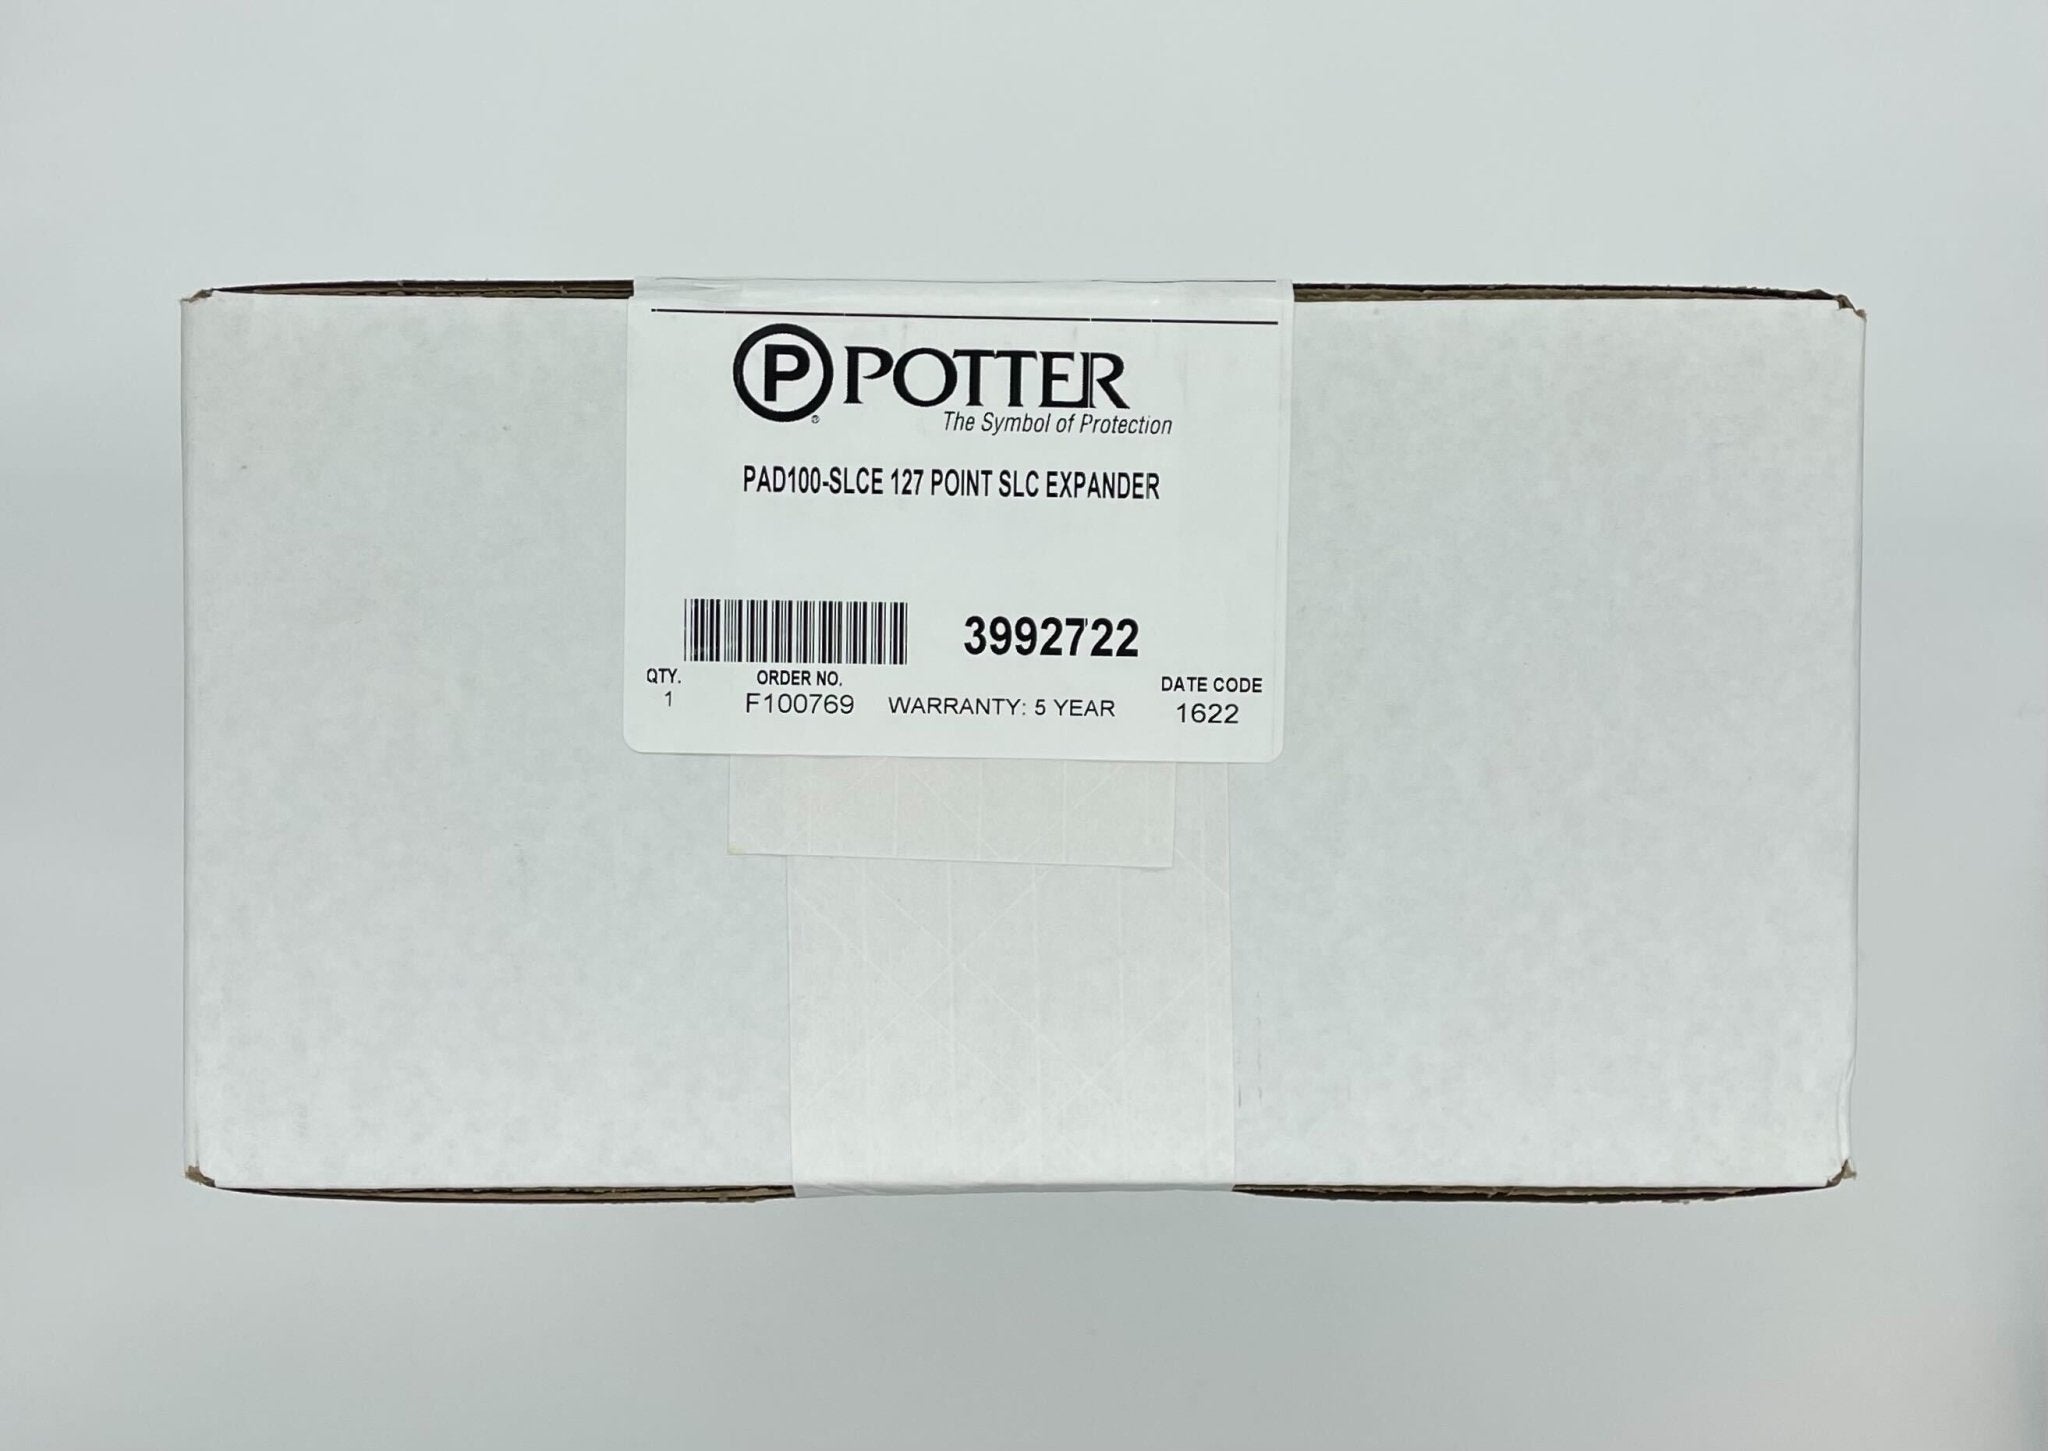 Potter PAD100-SLCE - The Fire Alarm Supplier